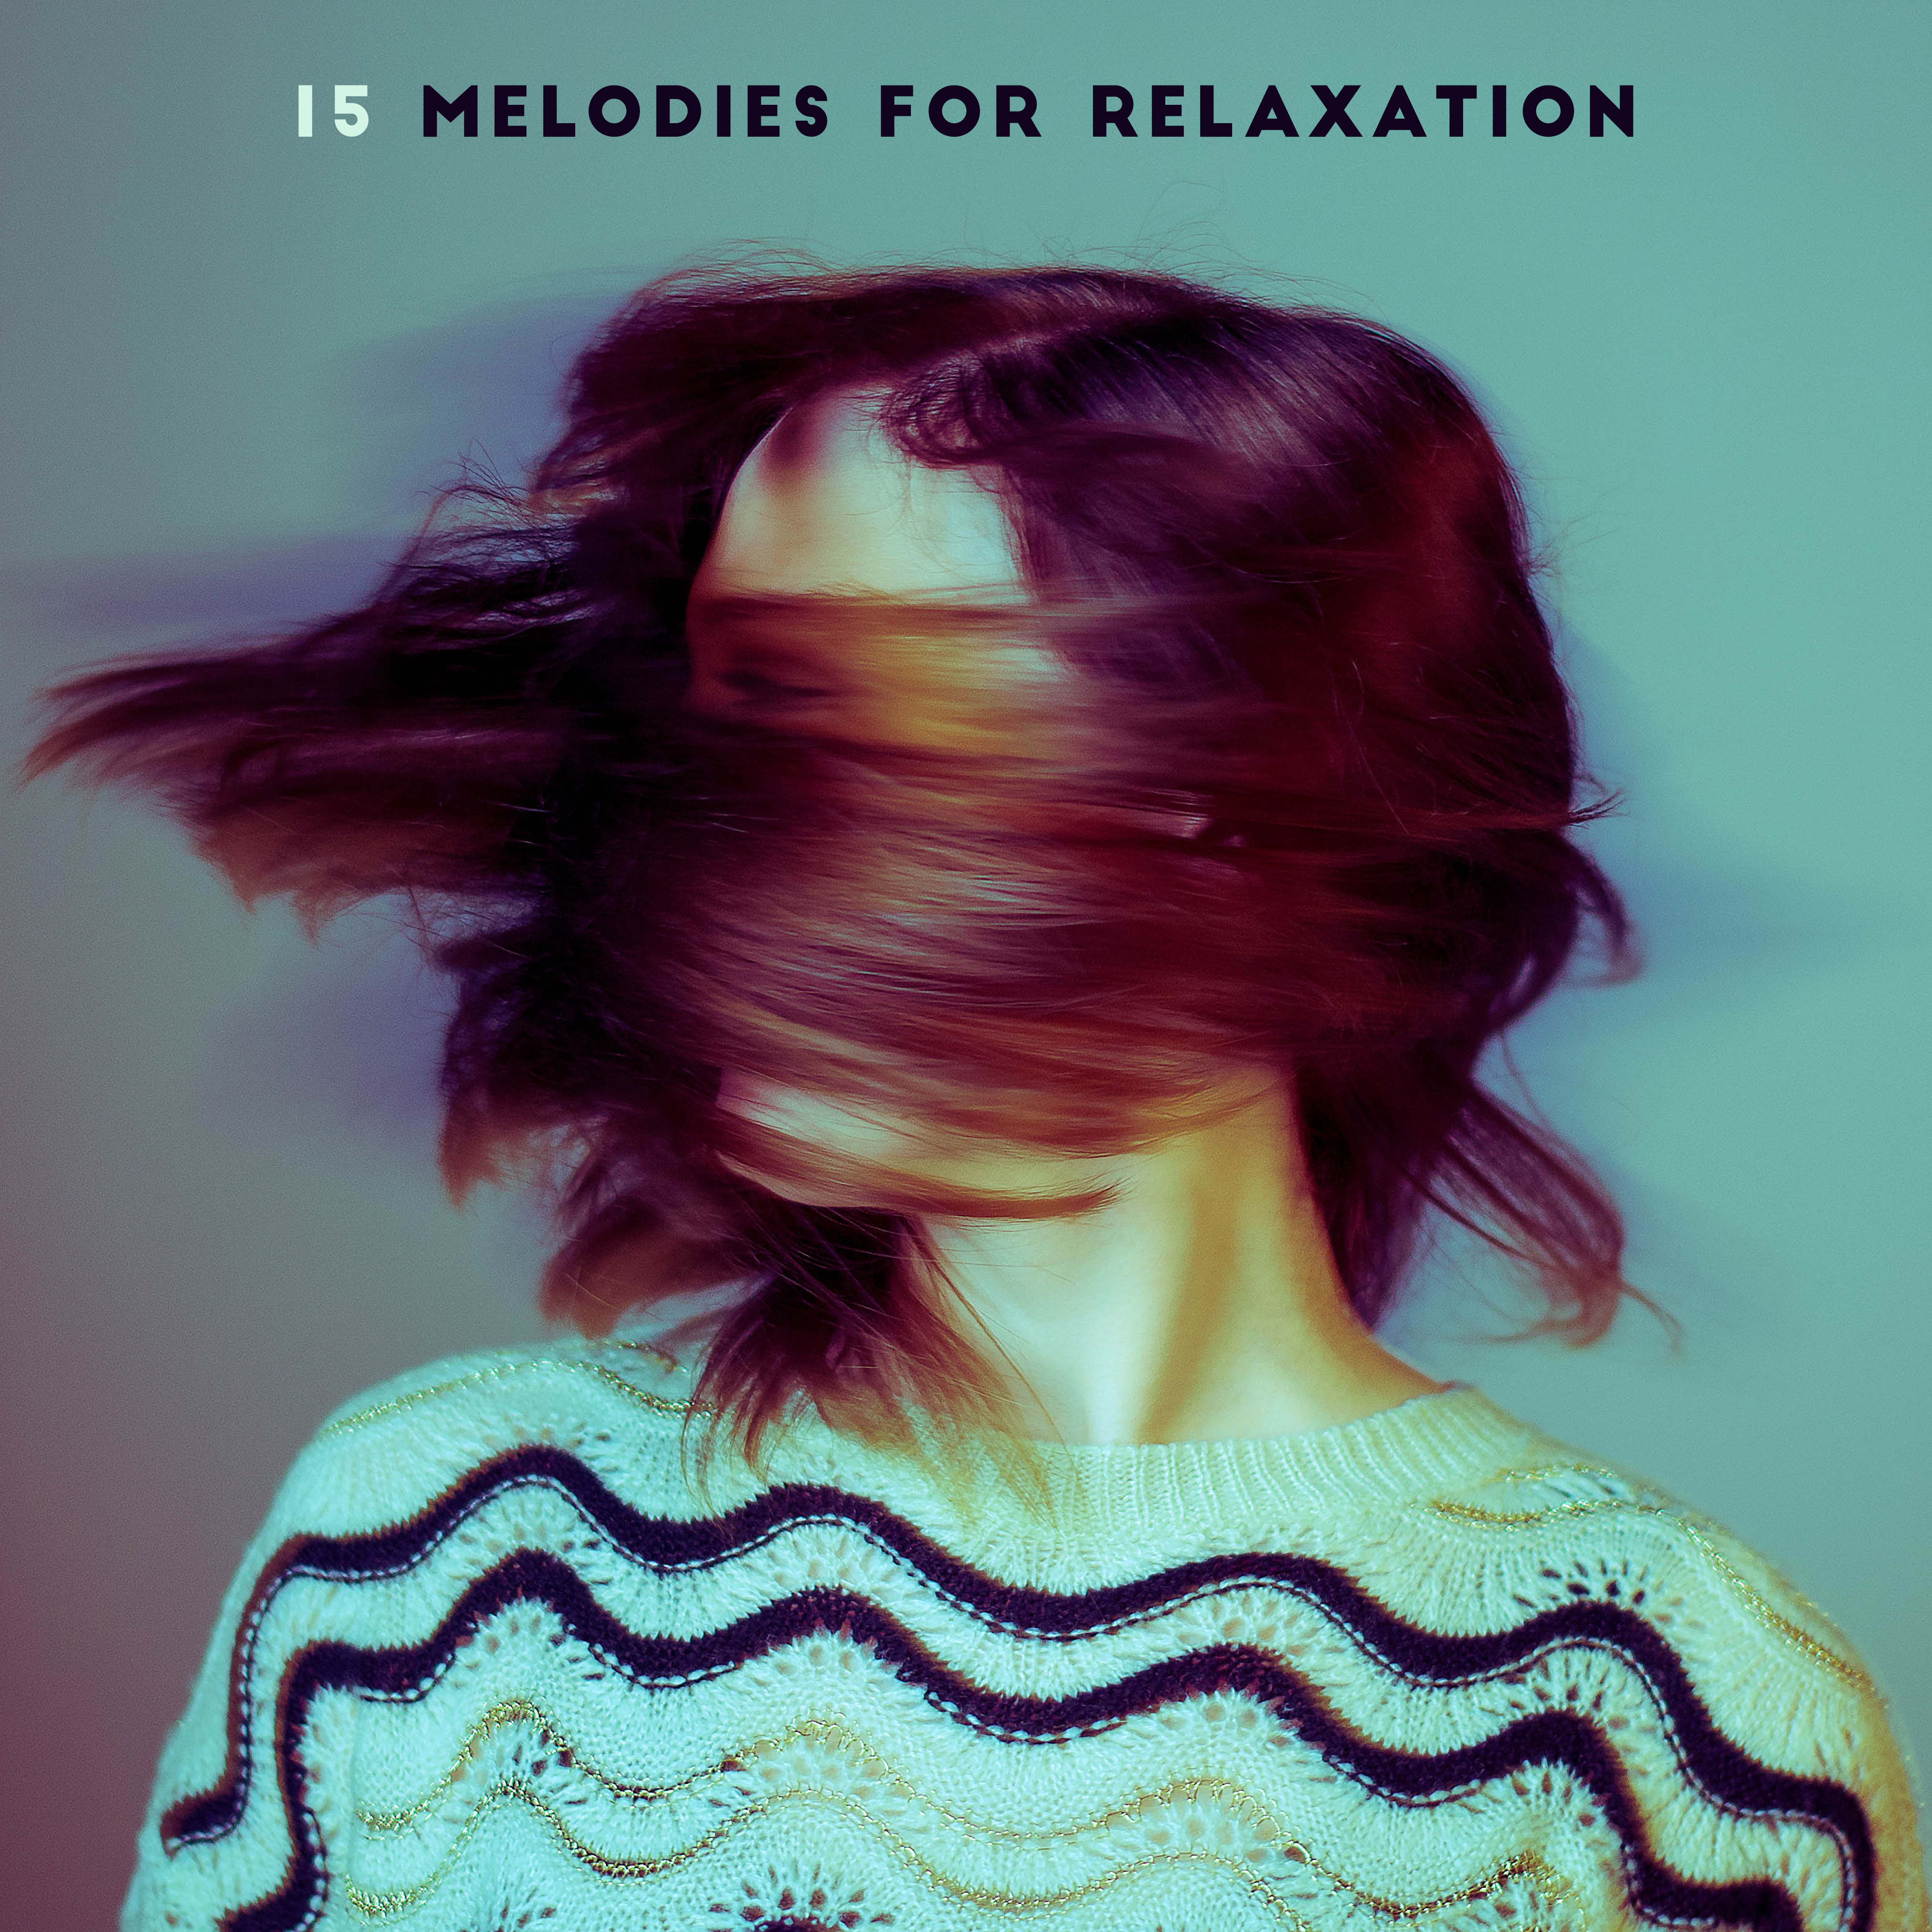 15 Melodies for Relaxation